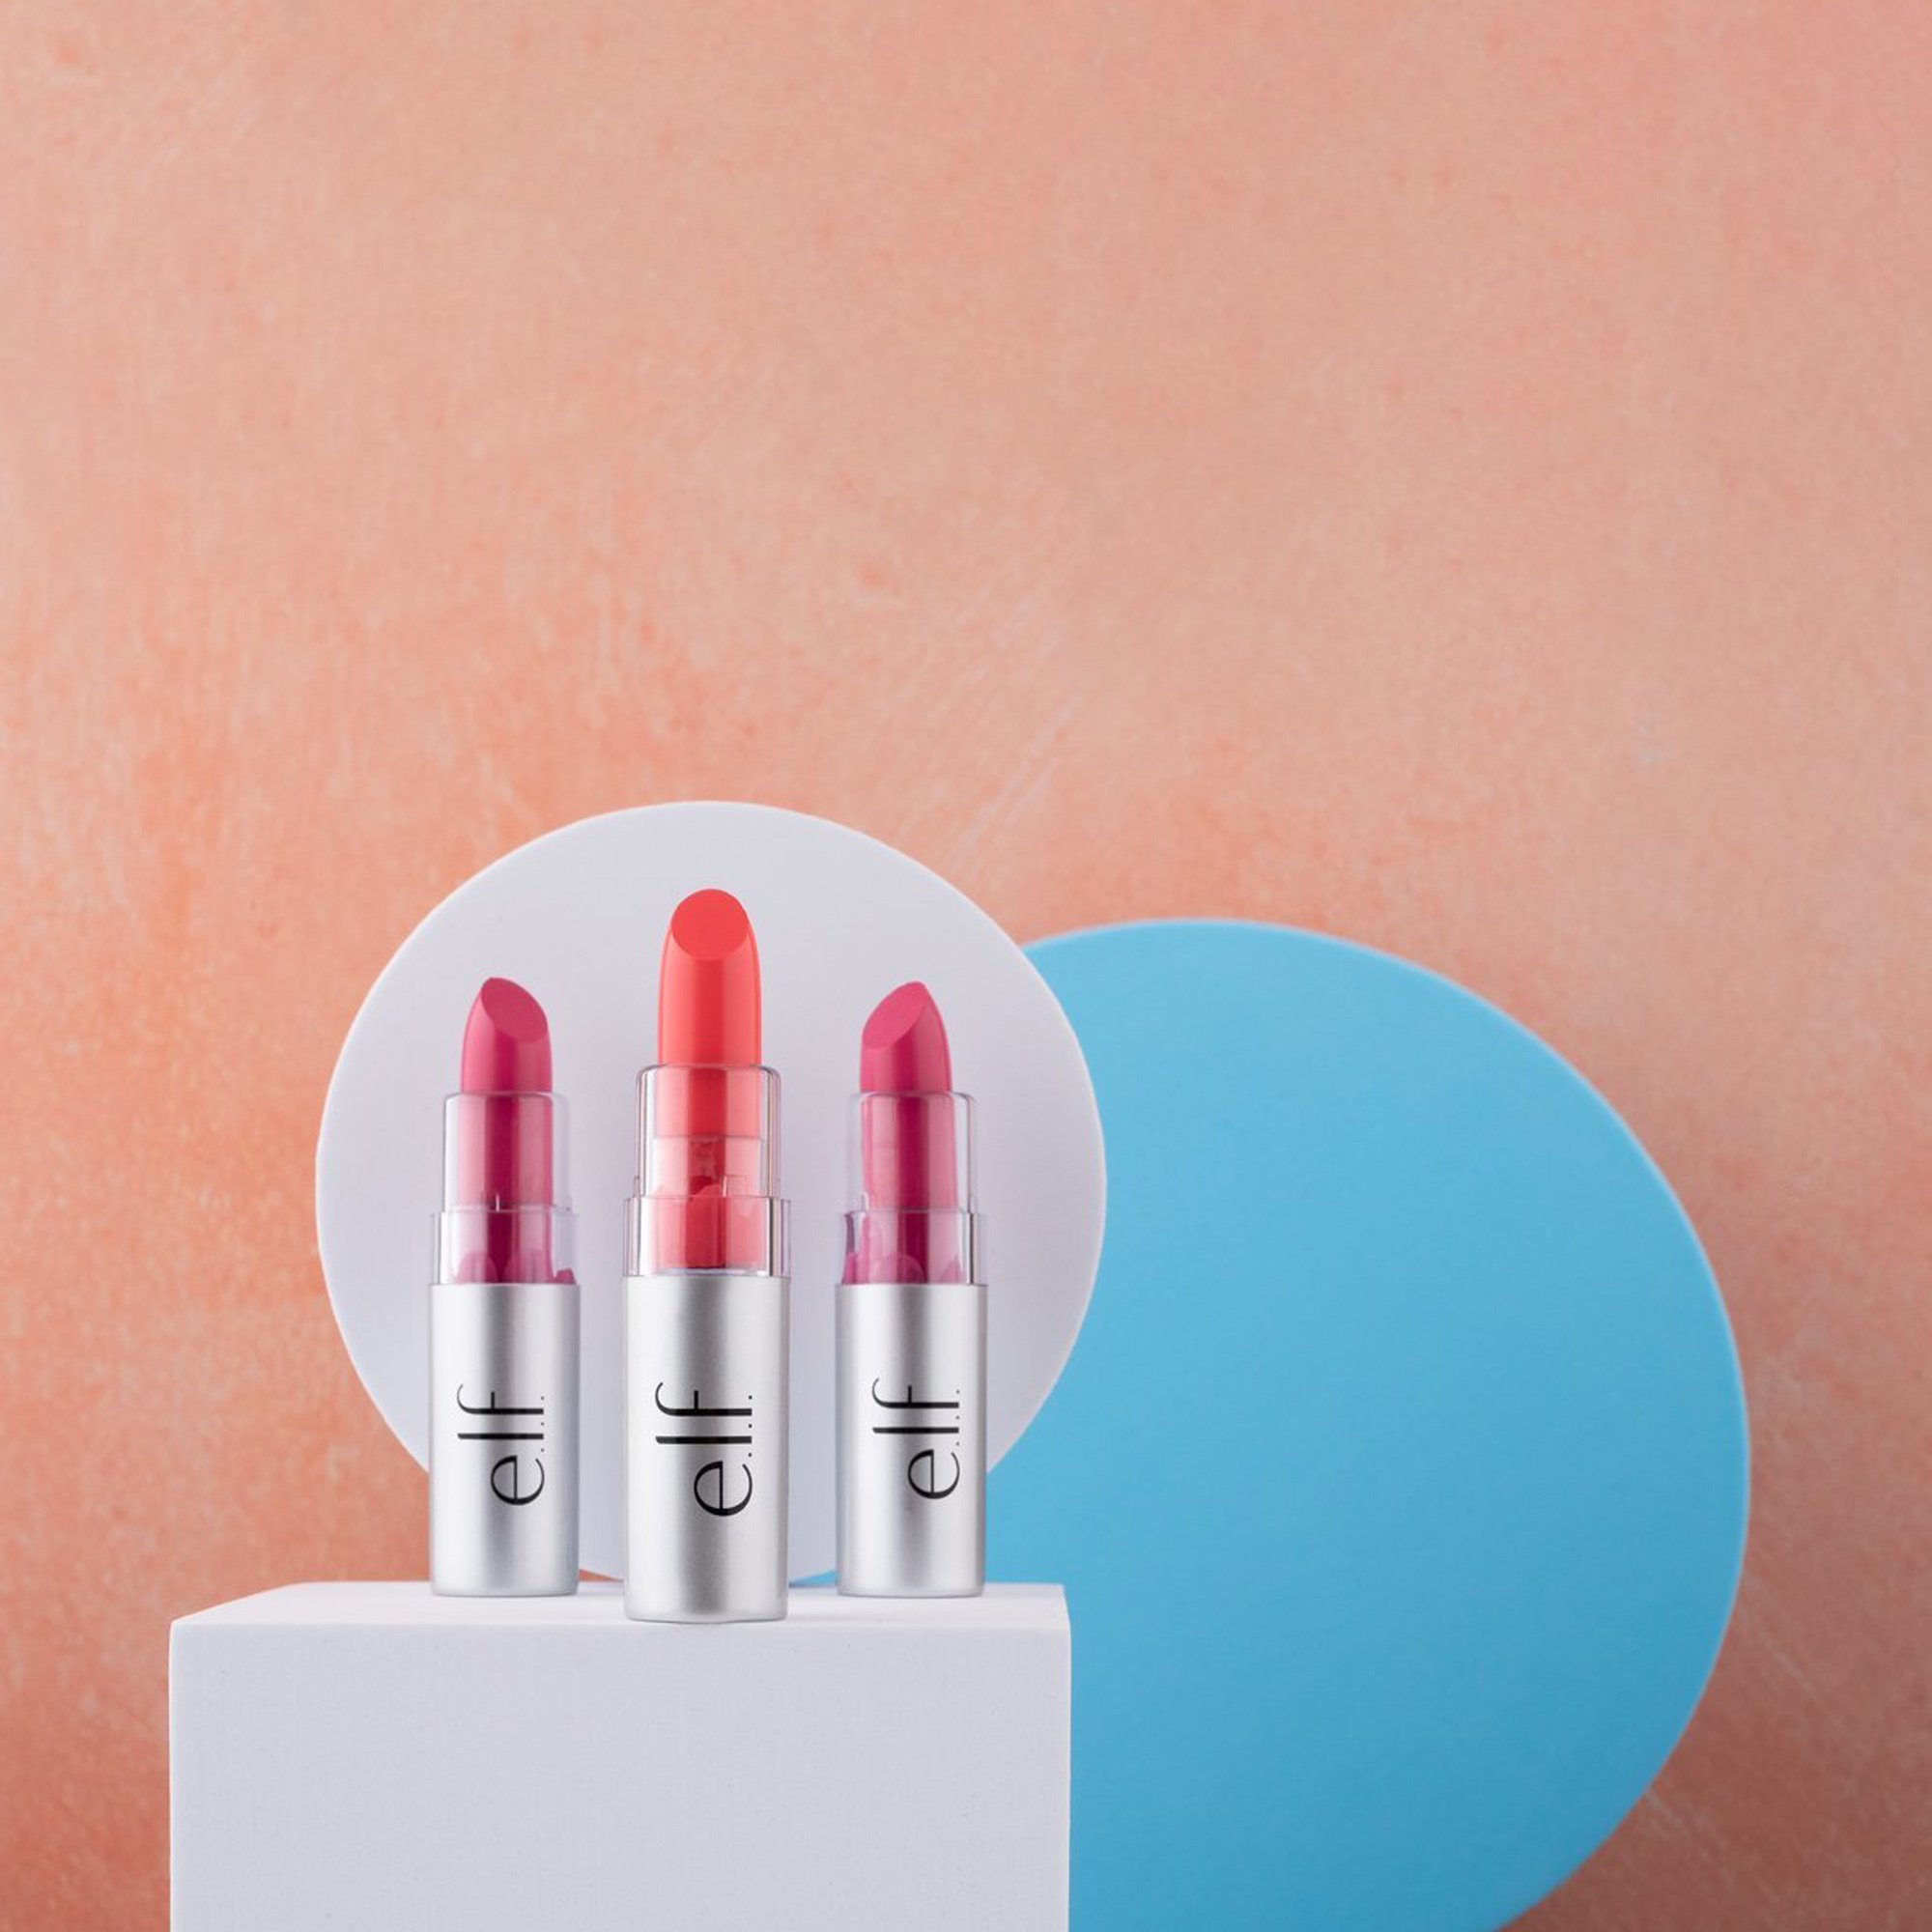  Modern colorful cosmetic photography will make a brand product stand out from the compition  